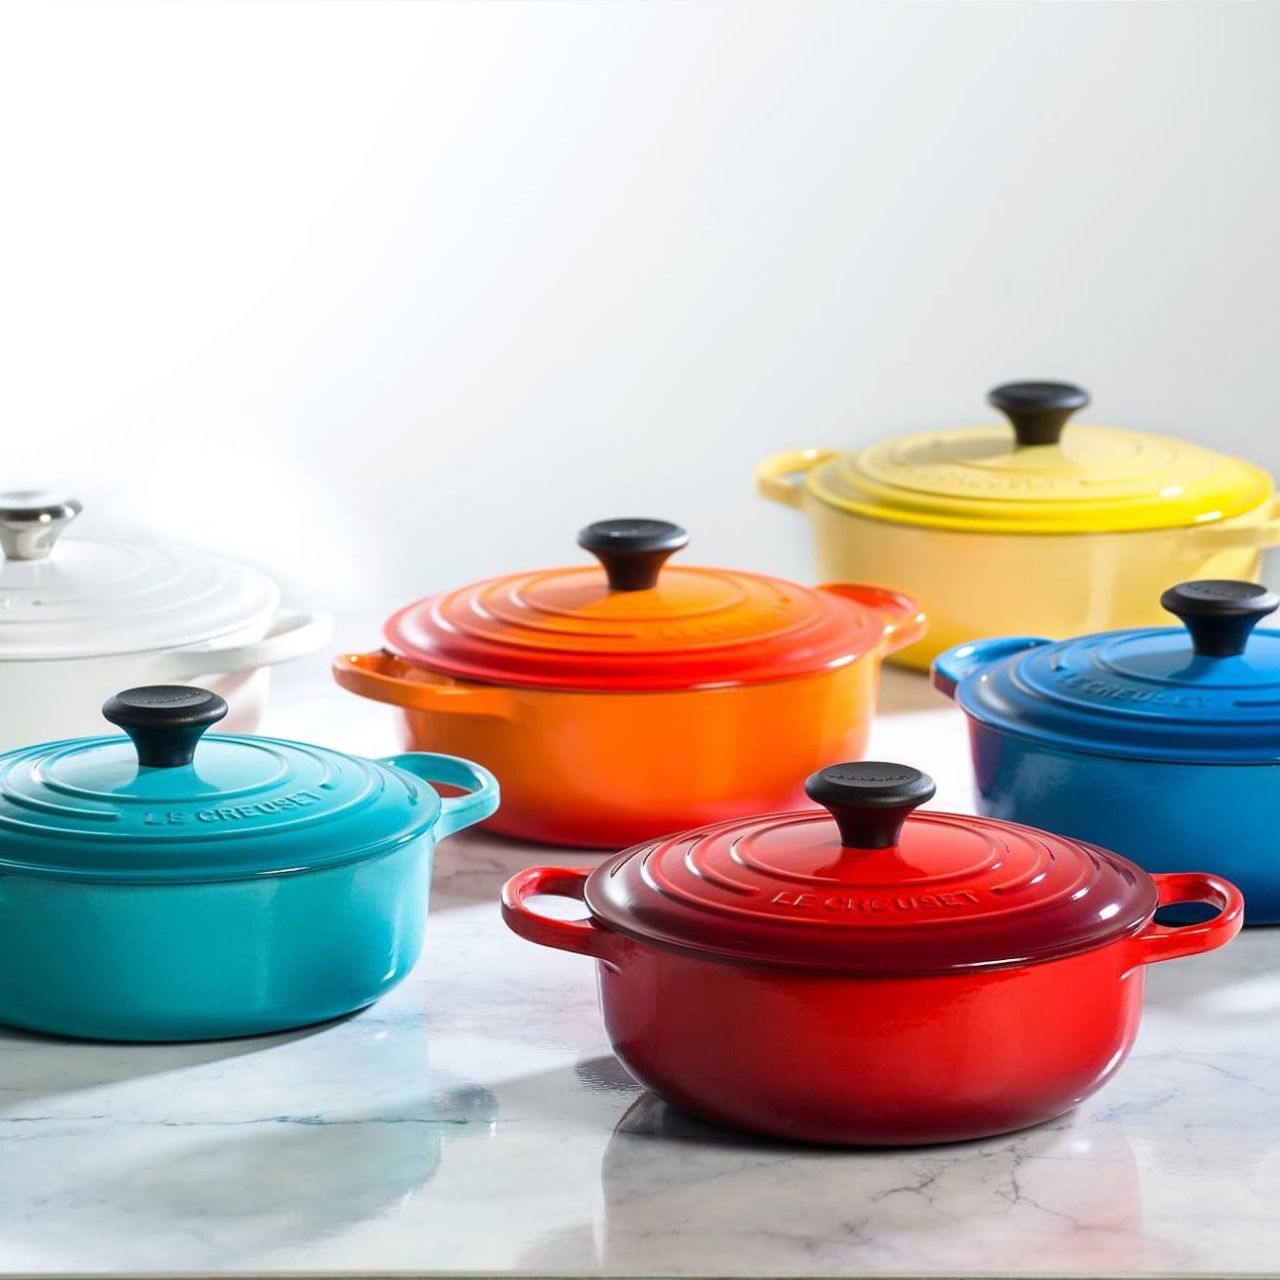 Things You Should Know Before Buying Le Creuset Cookware